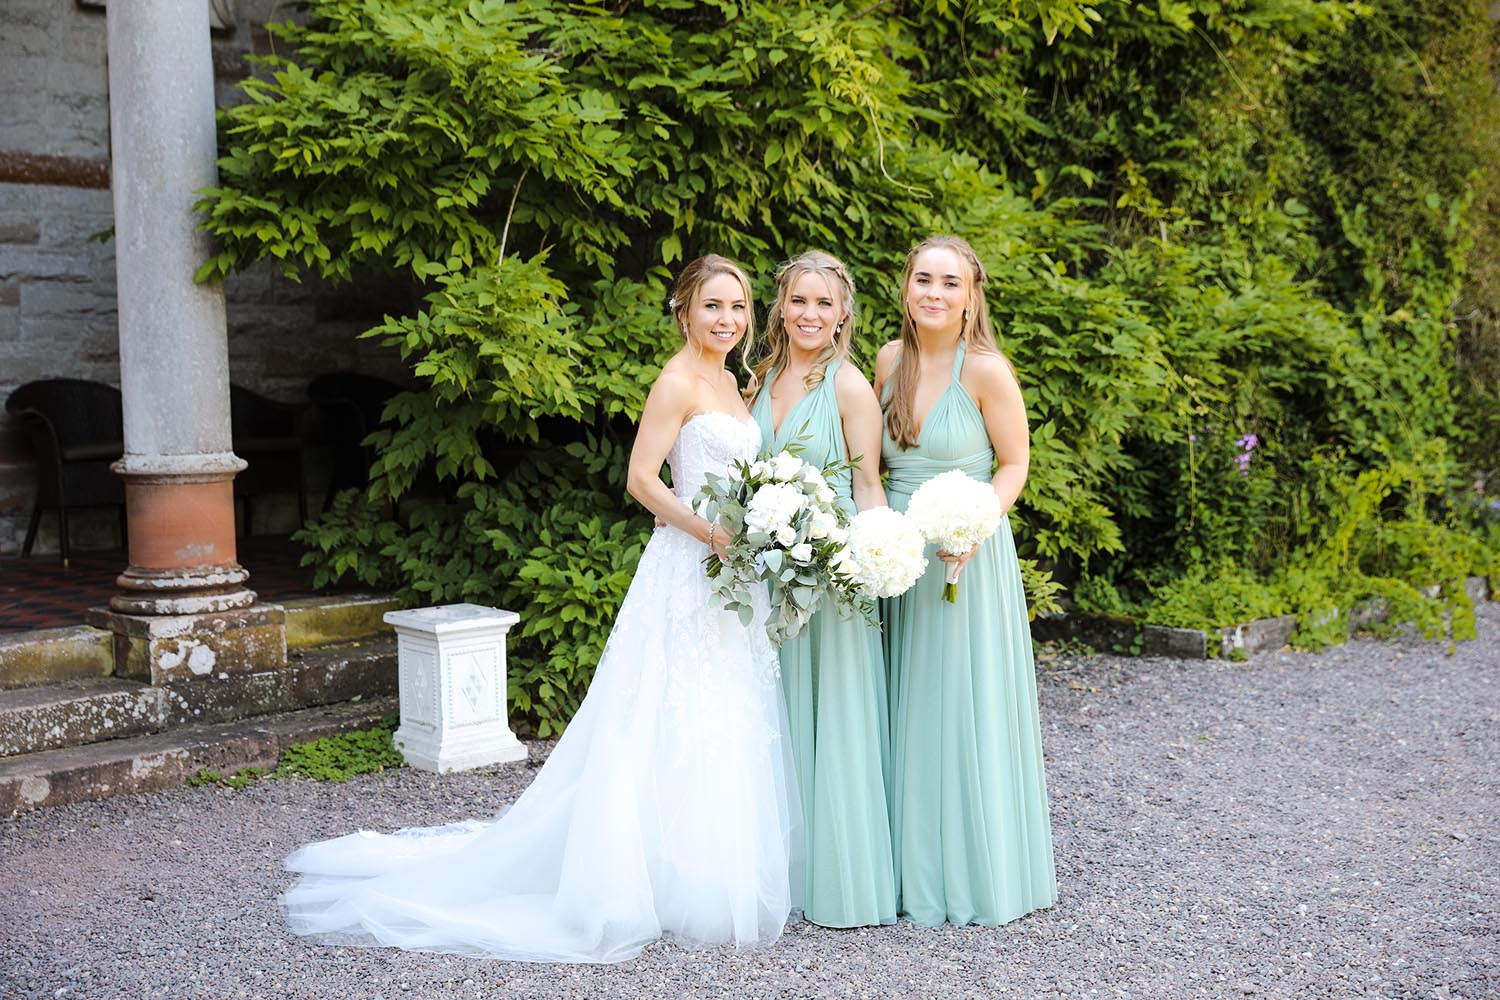 Bride with her bridesmaids on her wedding day